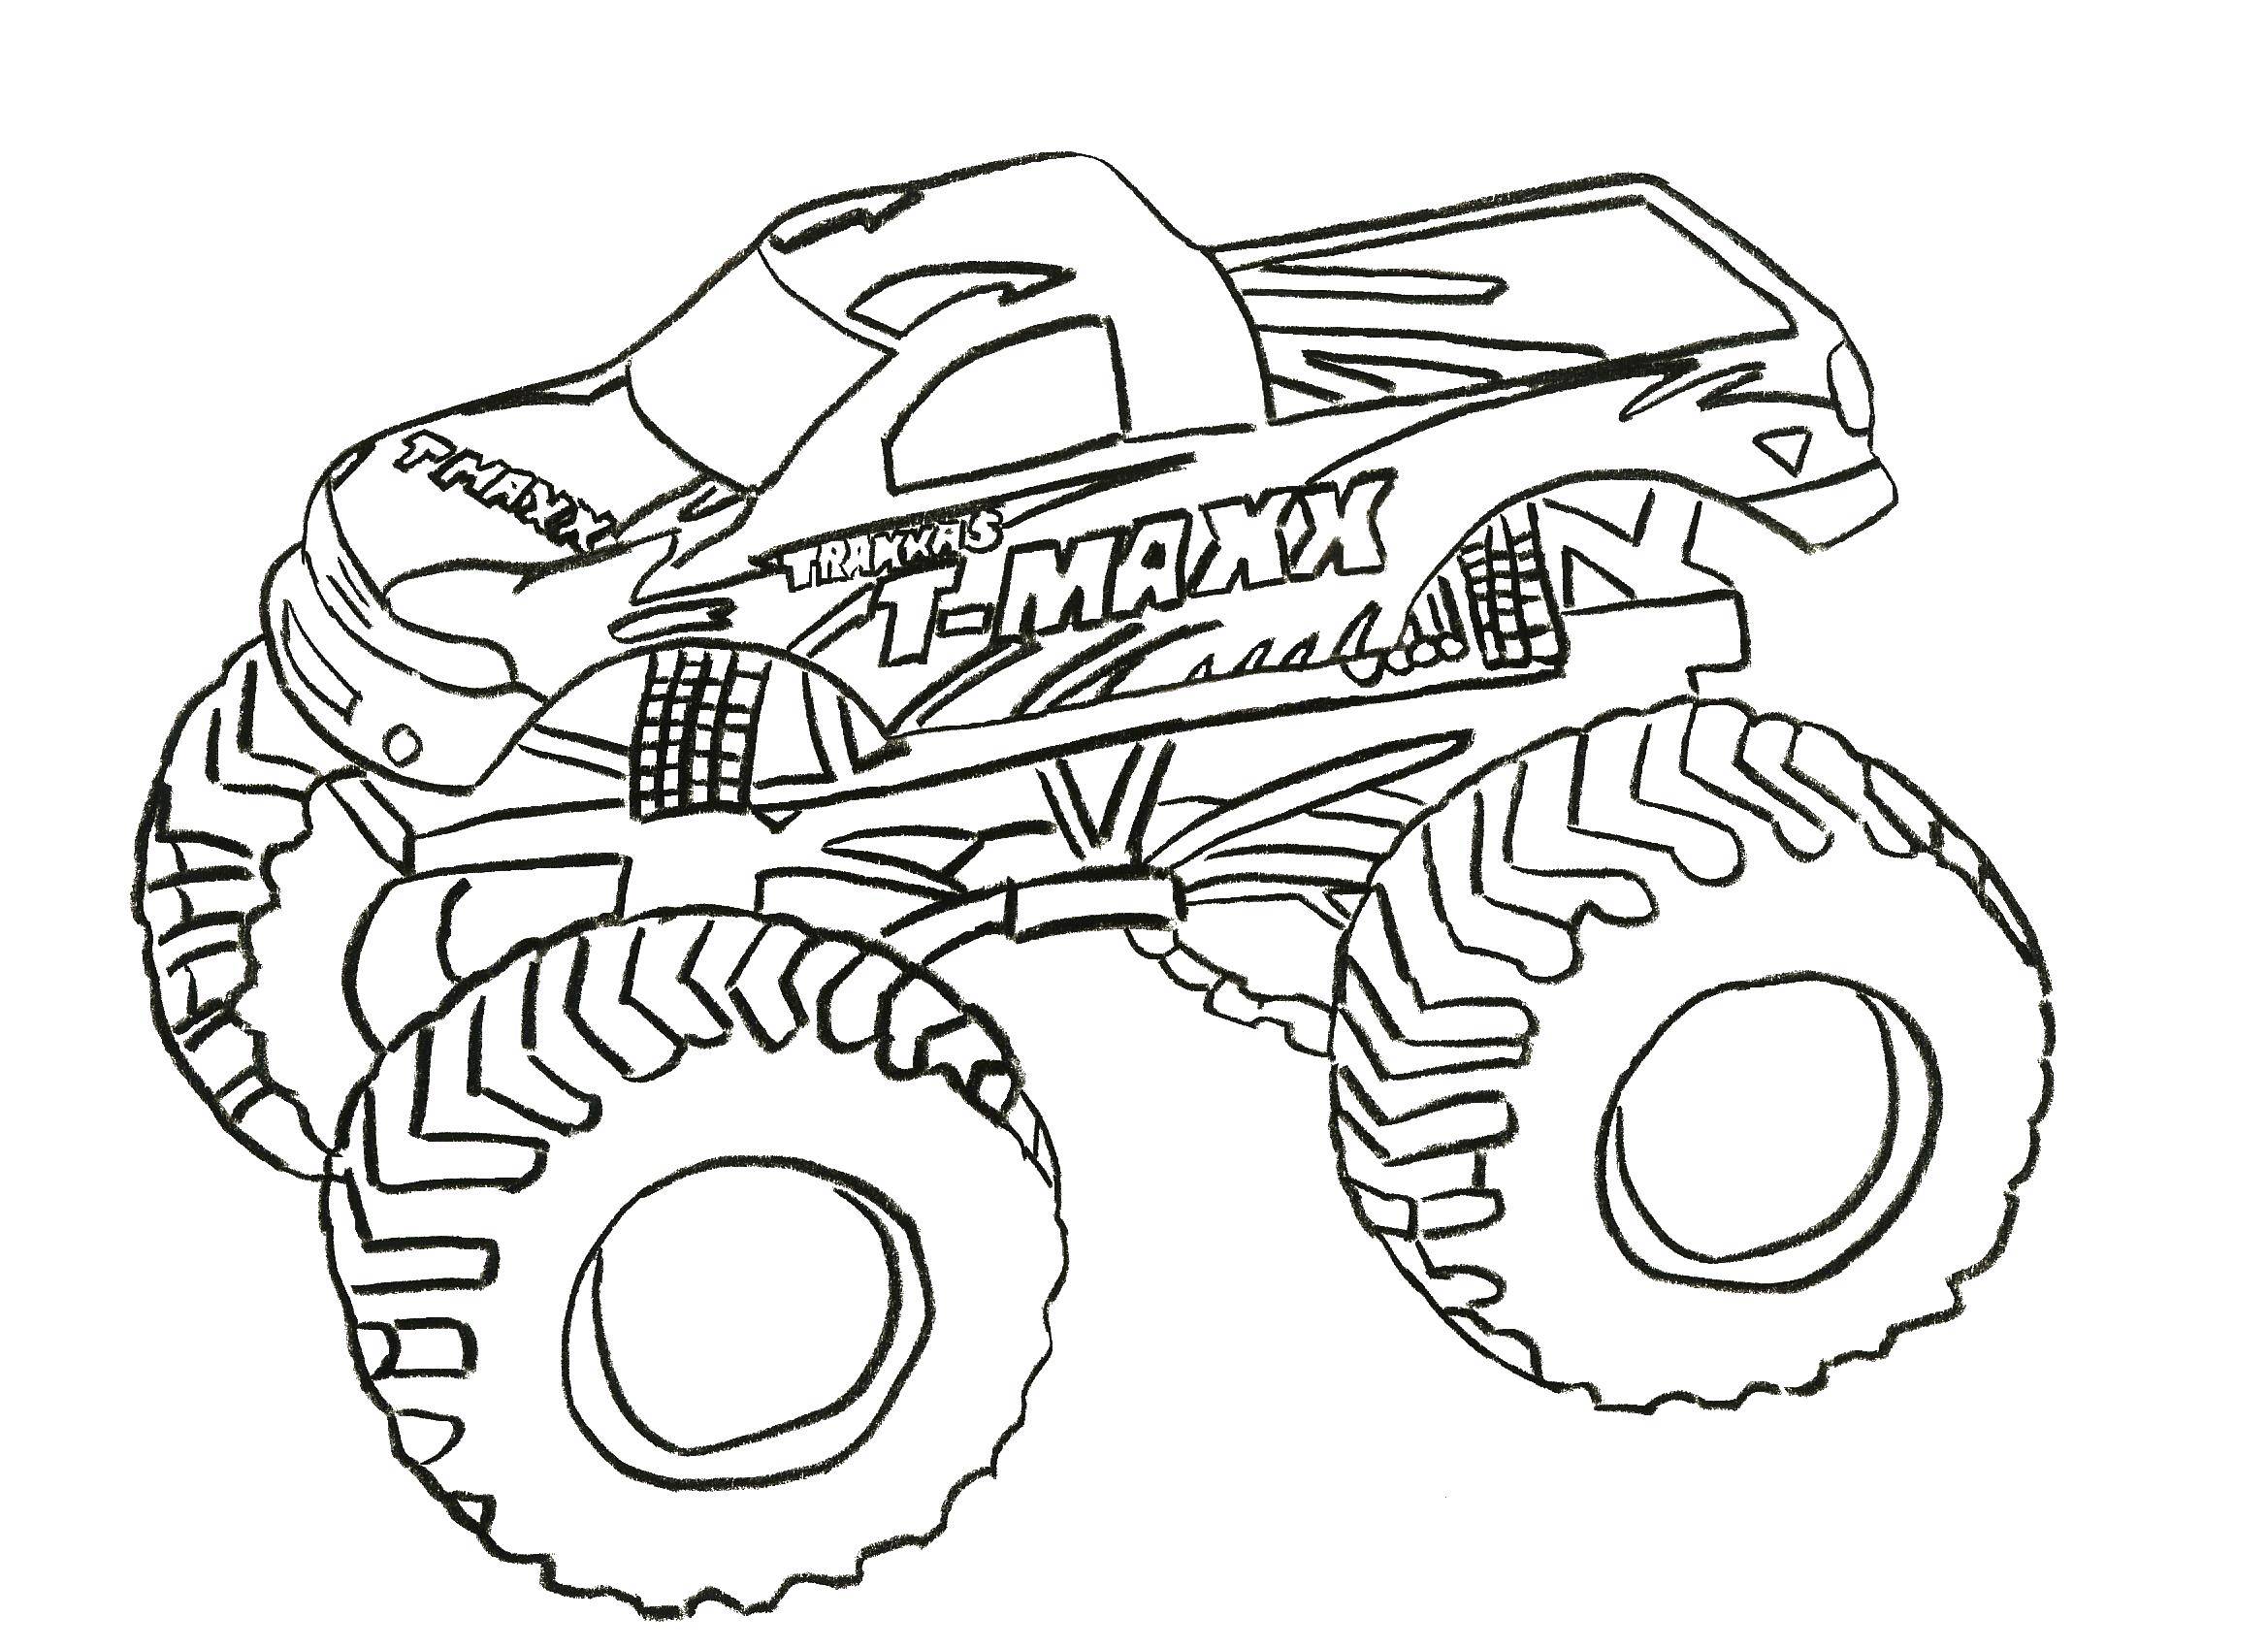 Coloring Jeep. Category machine . Tags:  Jeep, car.